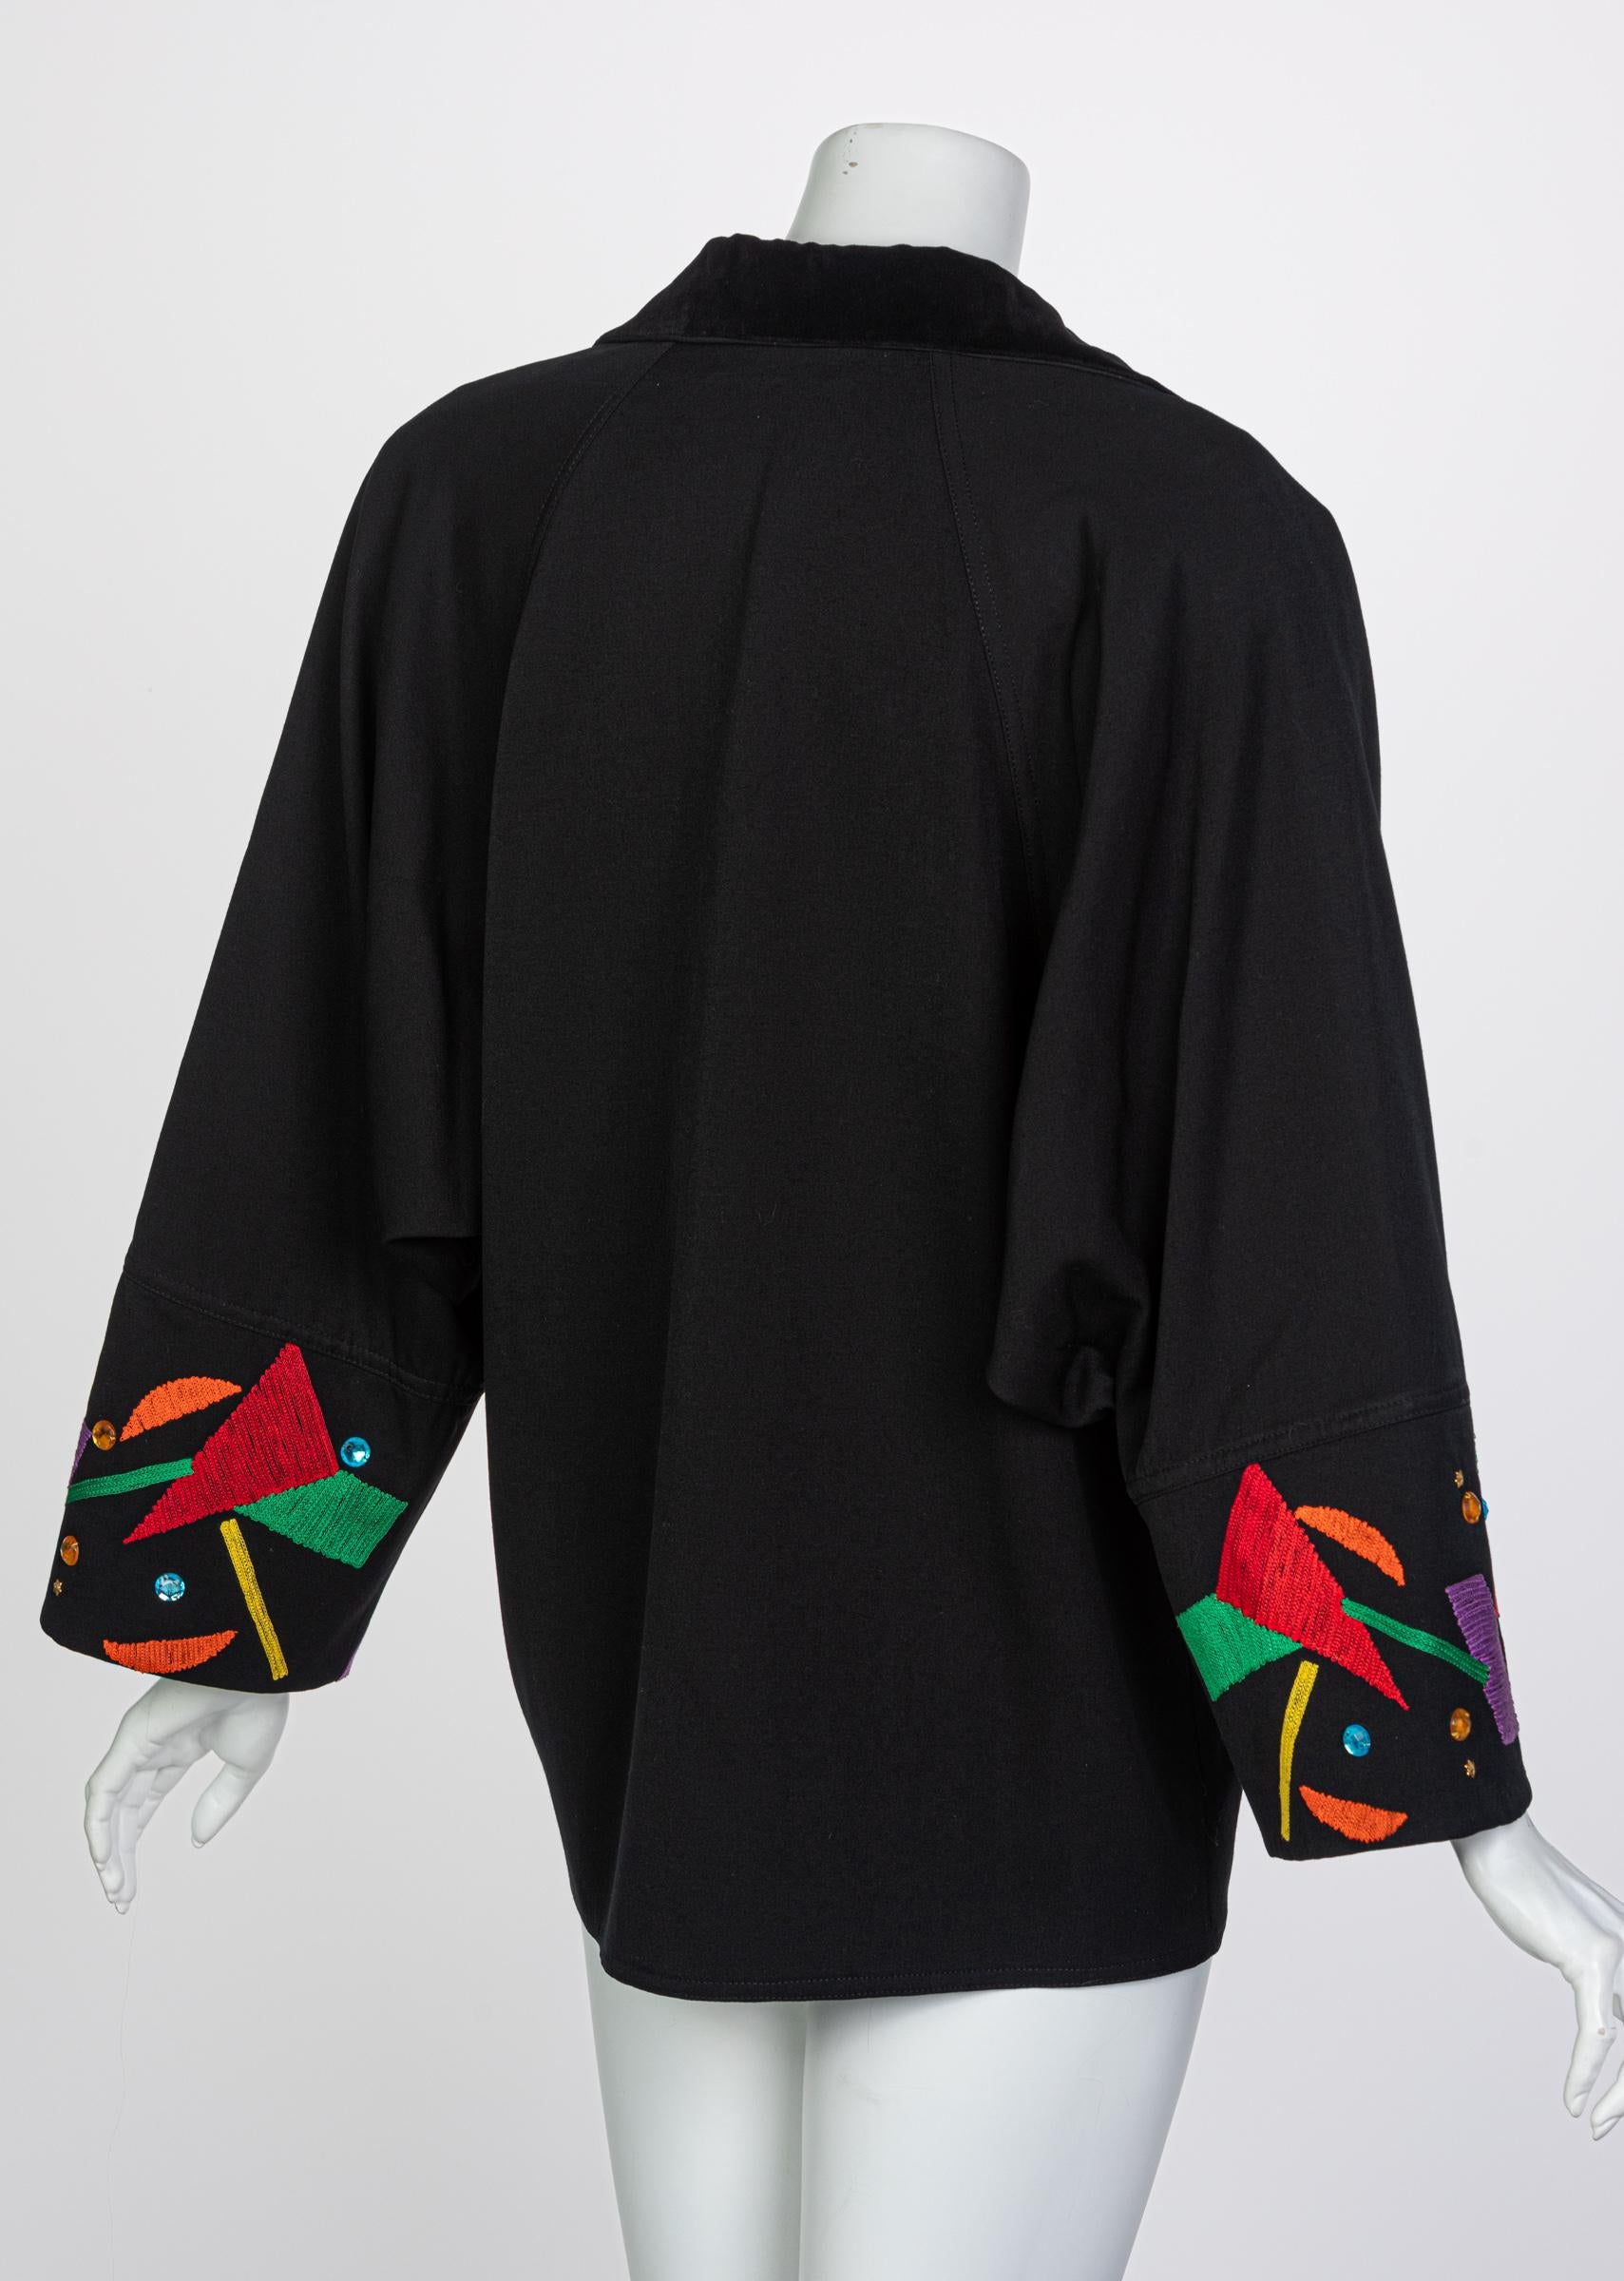 Women's or Men's Chloe Karl Lagerfeld Black Colorful Memphis Embroidered Jacket , 1980s